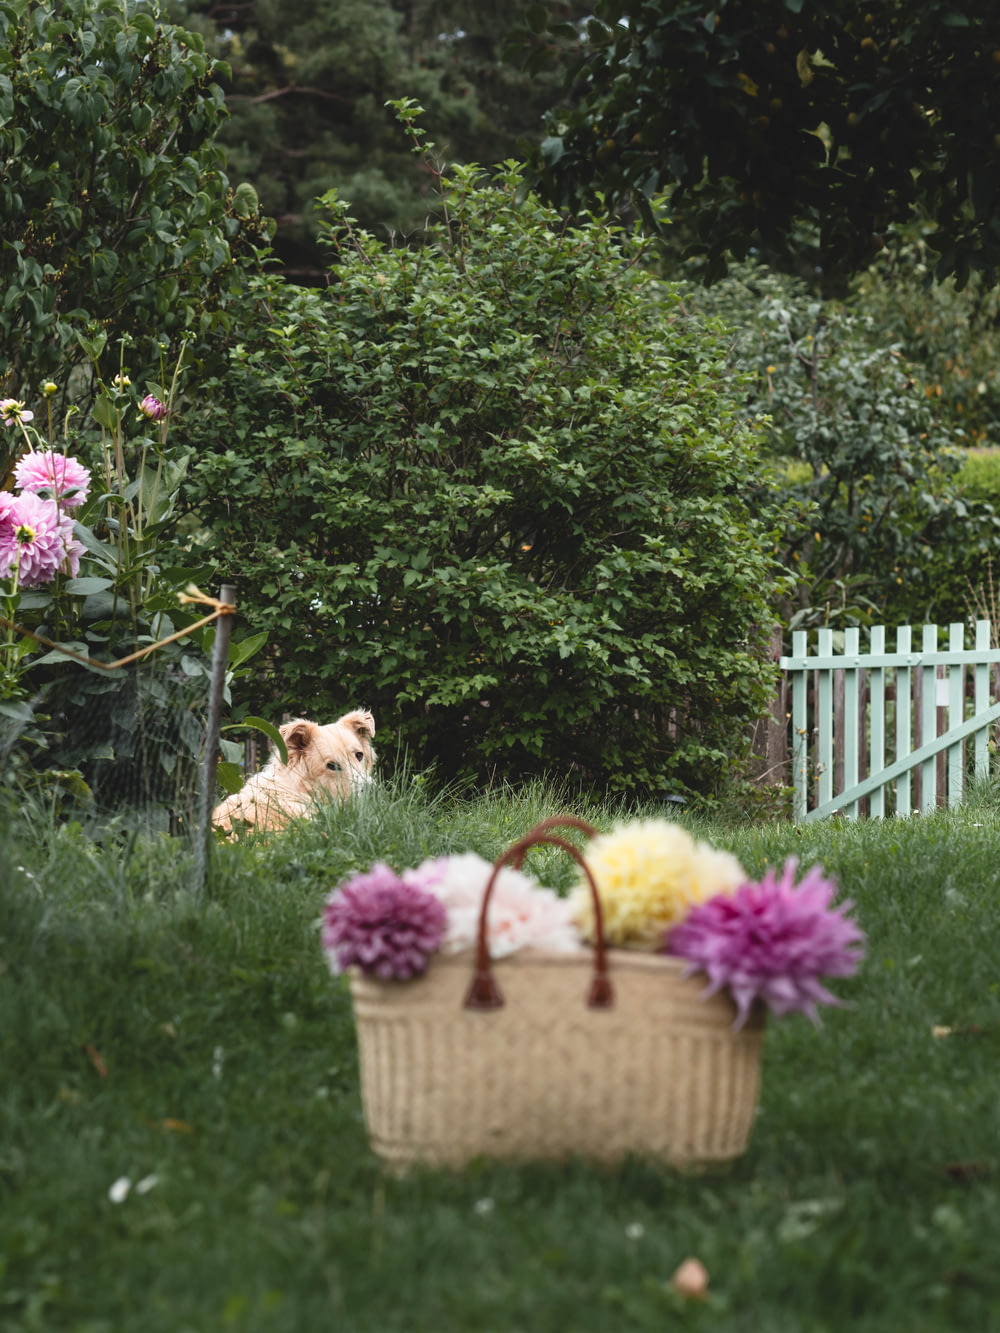 a dog laying in the grass next to a basket of flowers